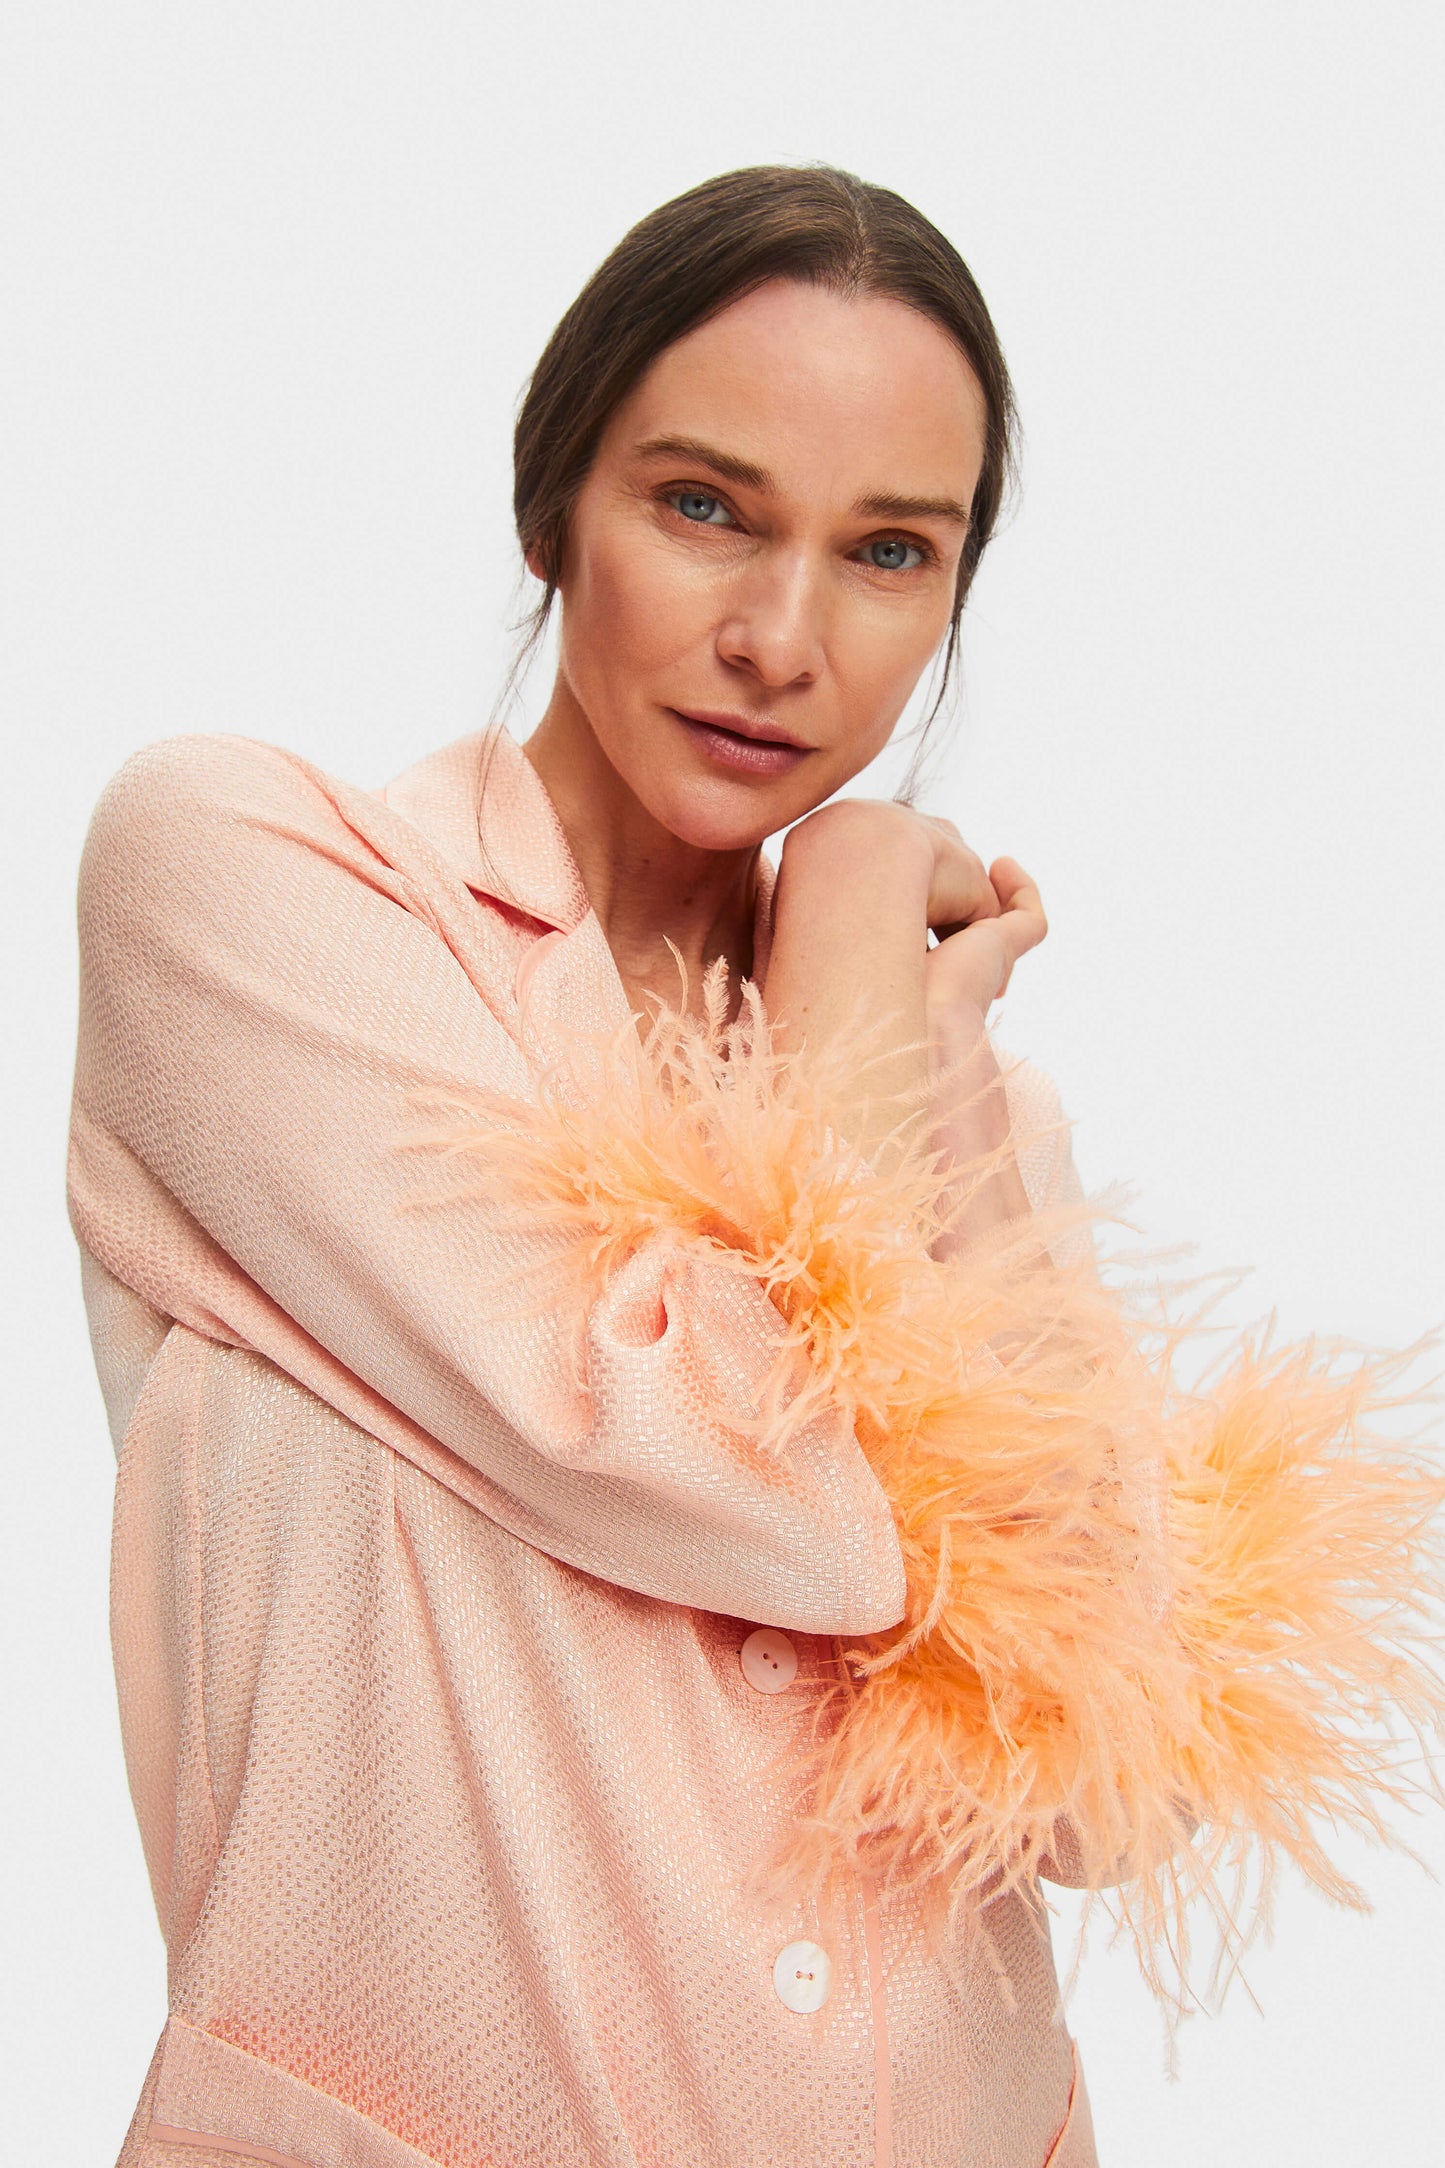 Jacquard Party Pajamas Set with Detachable Feathers in Peach